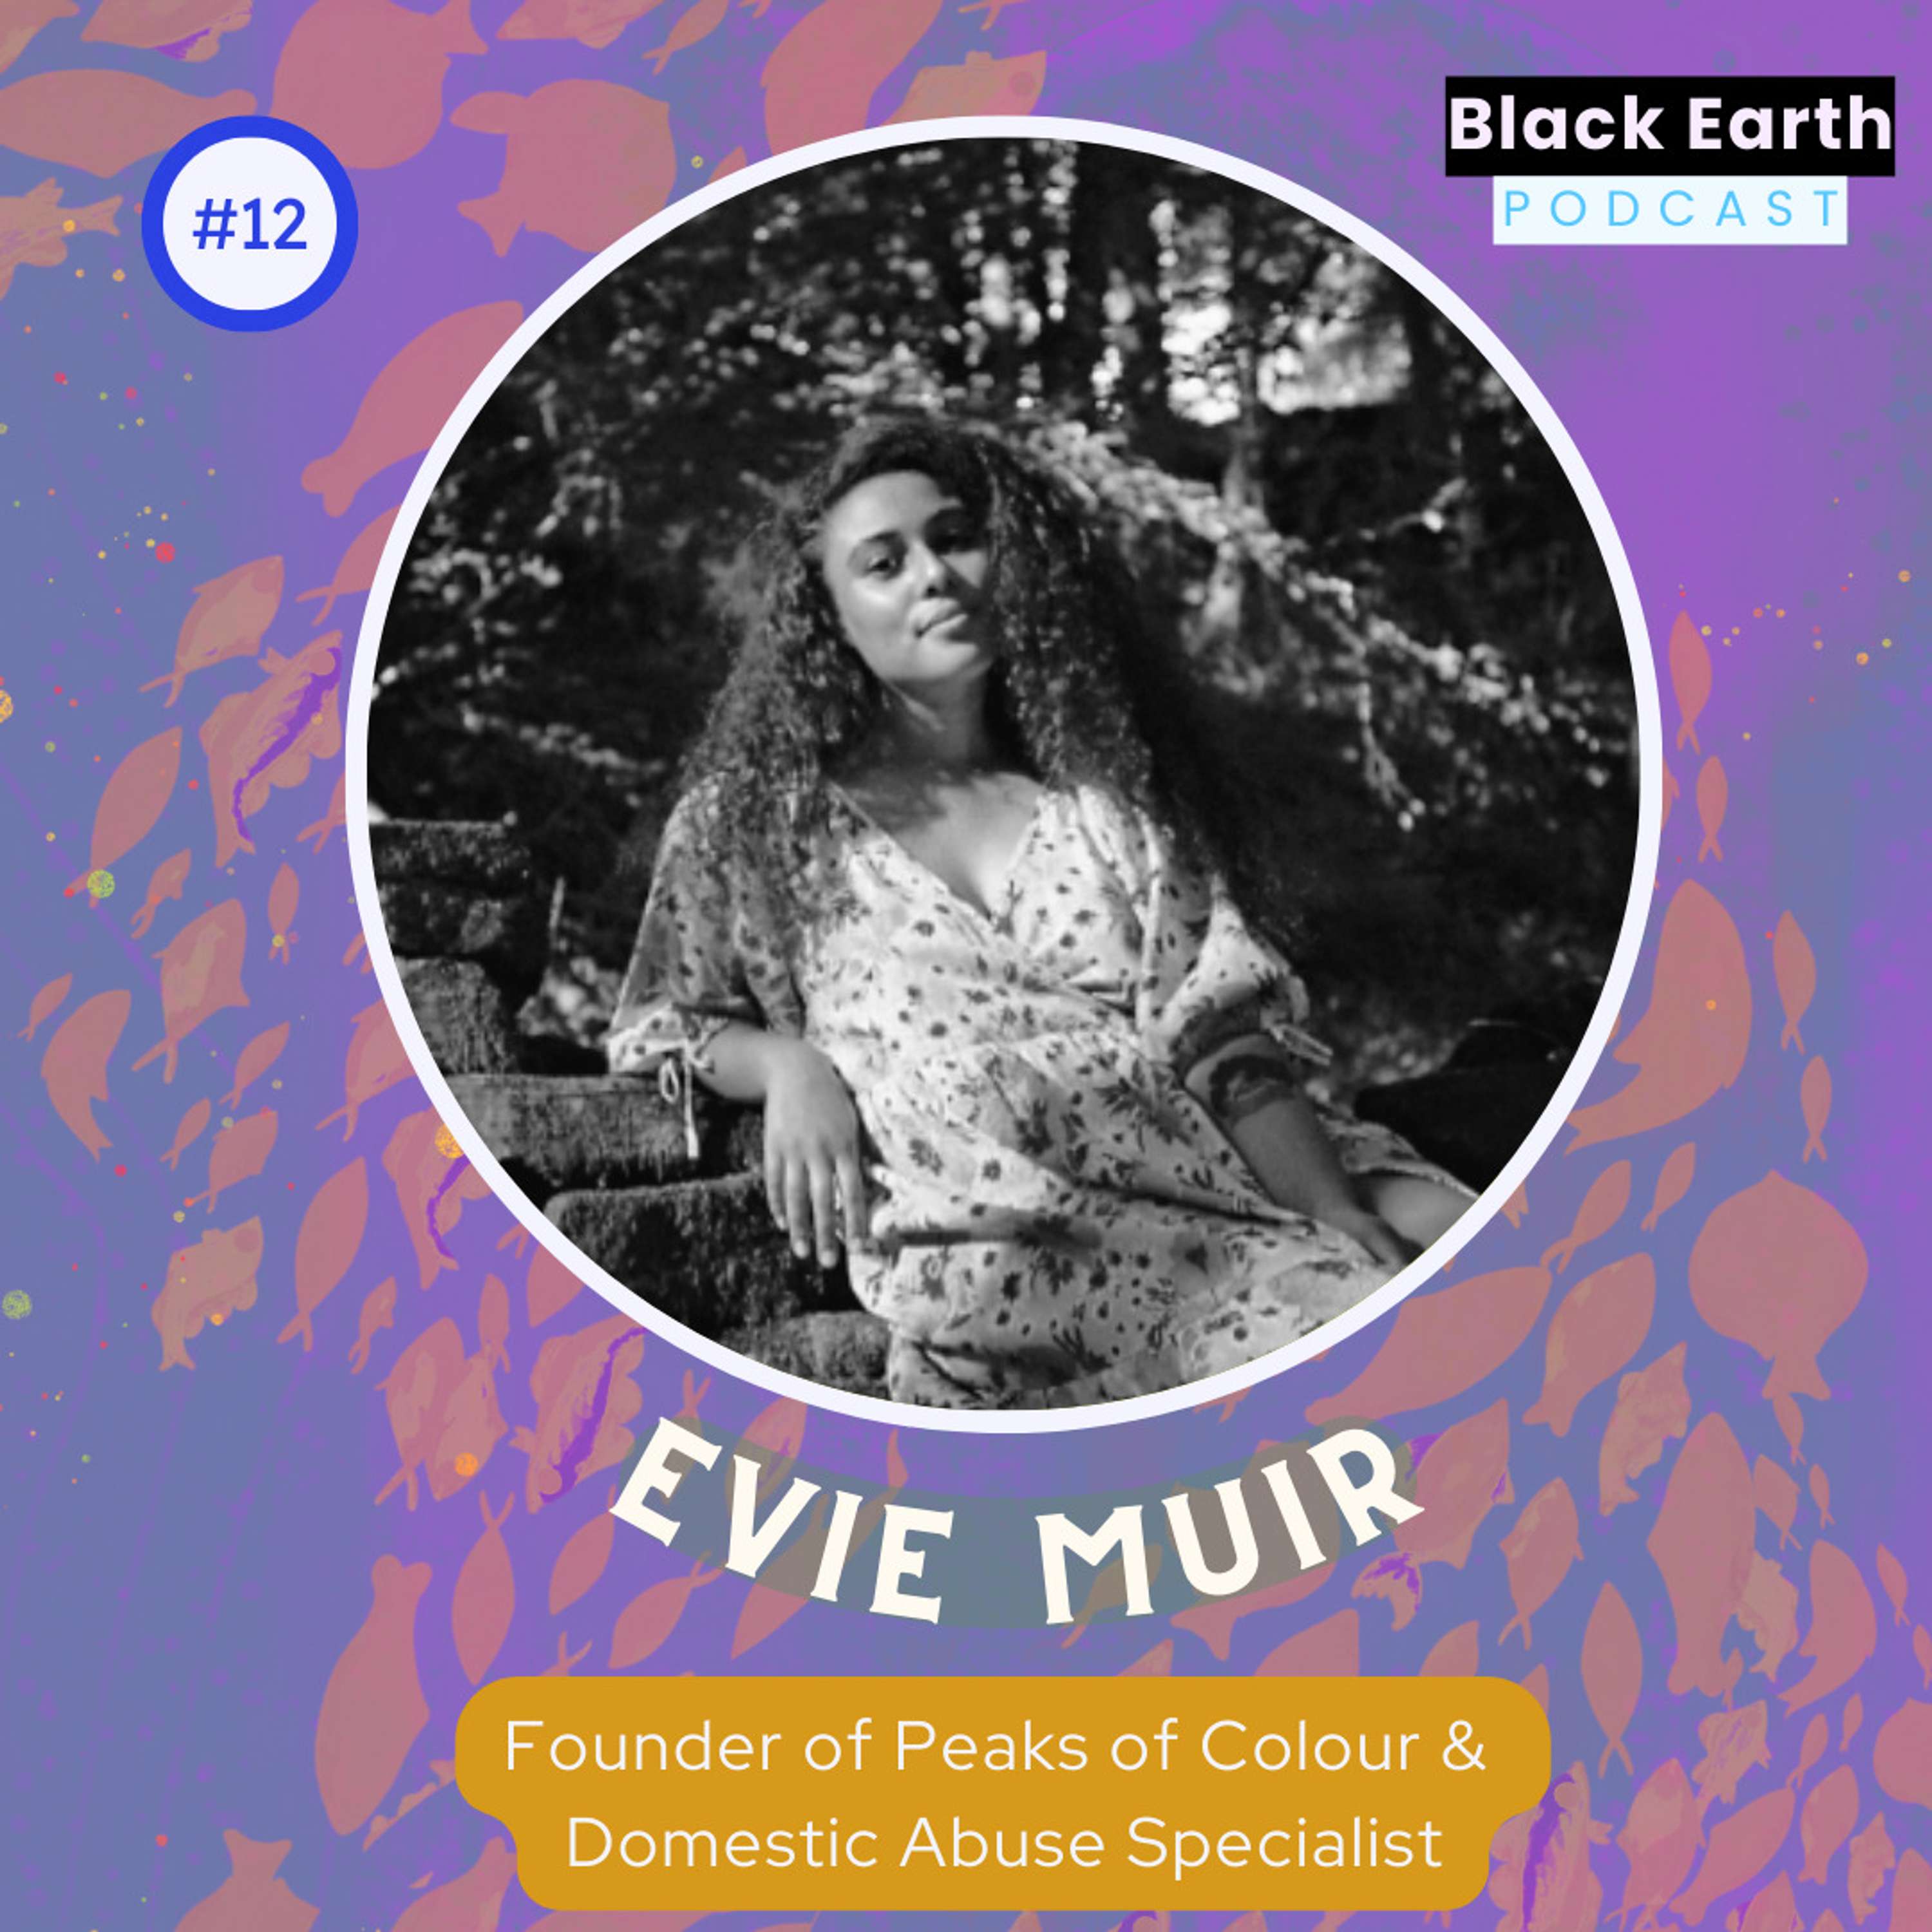 Understanding abolitionist Earth care with Evie Muir